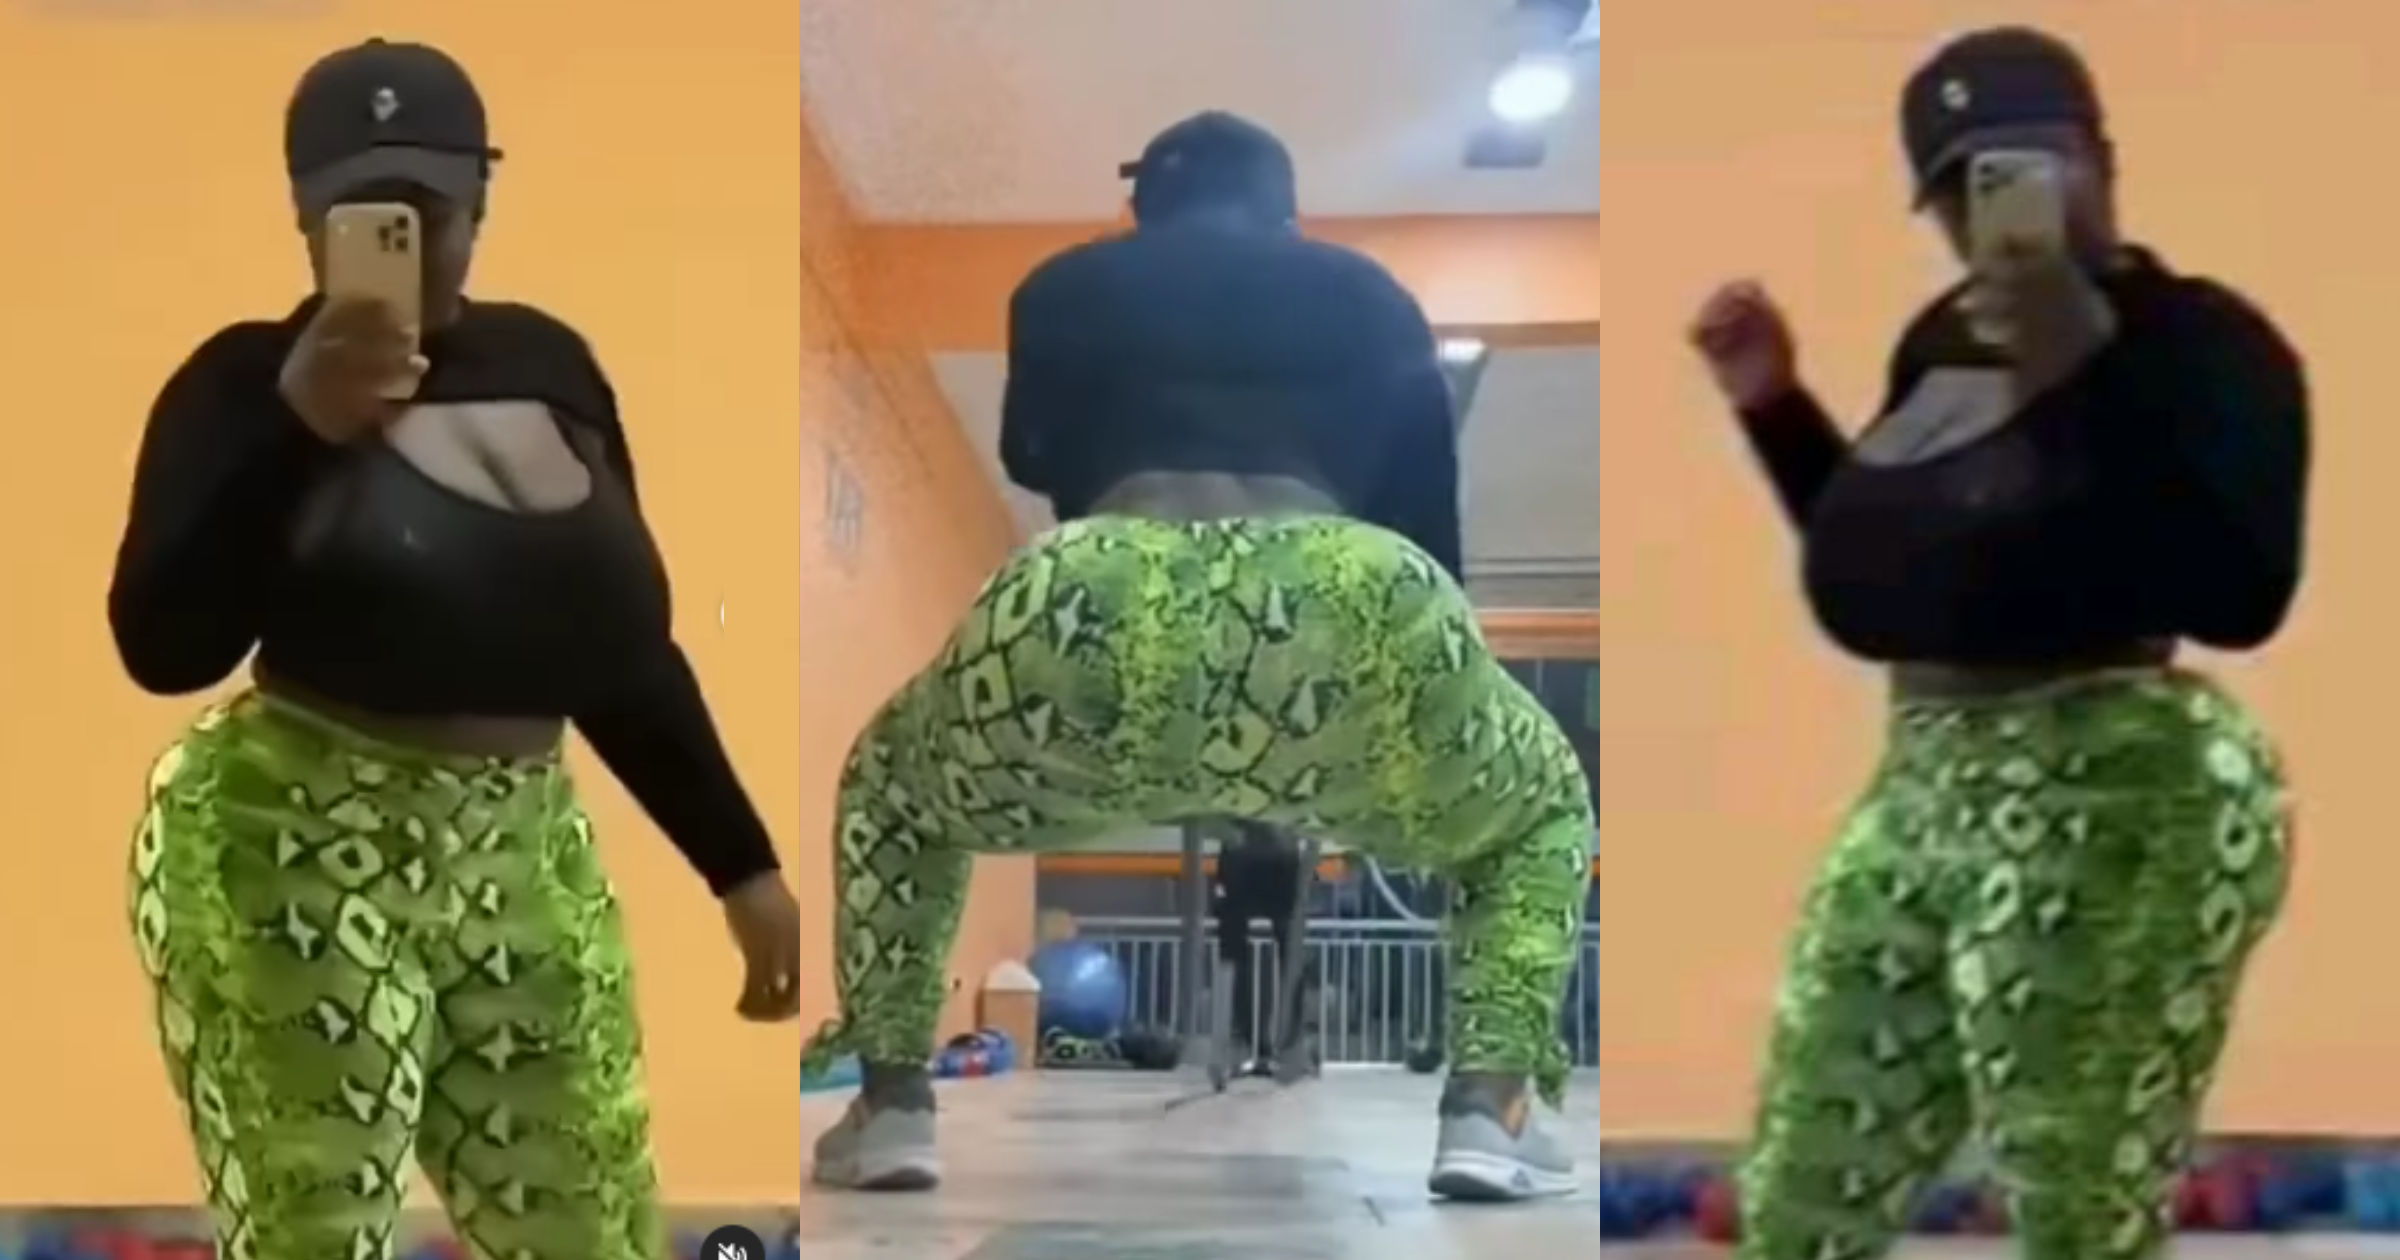 Kumawood actress Maame Serwaa starts 2022 with a bang as she drops hot video from her gym session